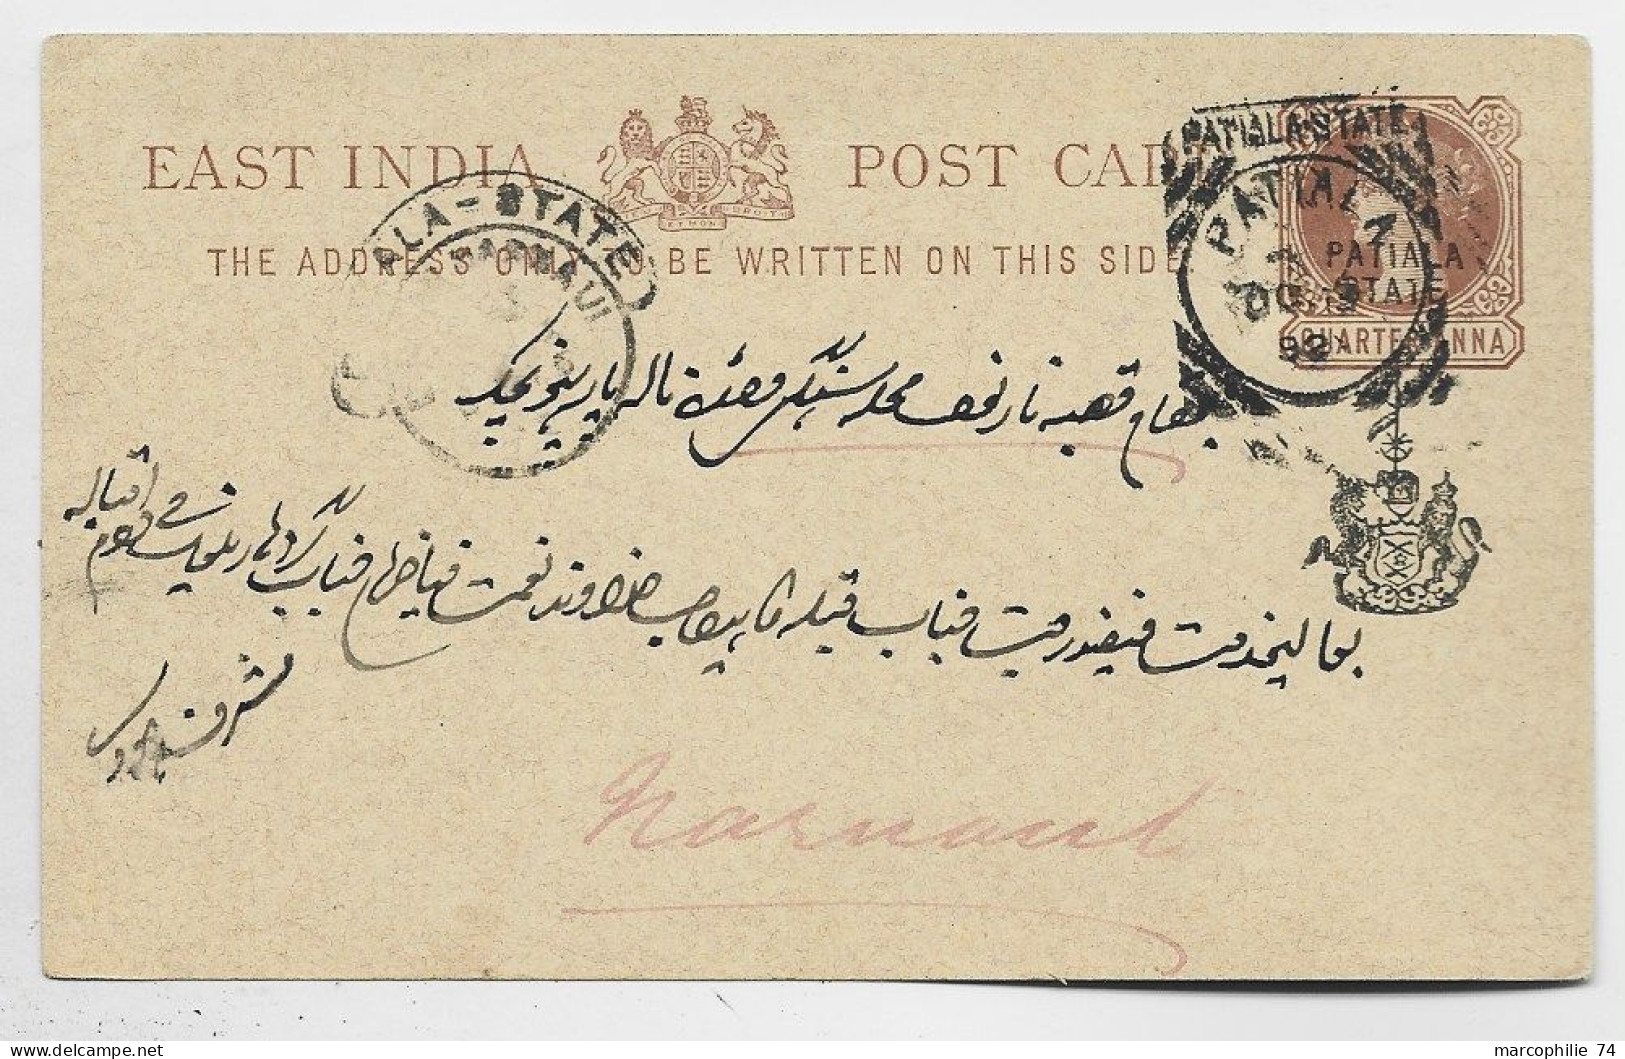 INDIA QUARTER ANNA ENTIER PATIALA STATE POST CARD EAST INDIA 1892 TO INDIA - 1882-1901 Empire